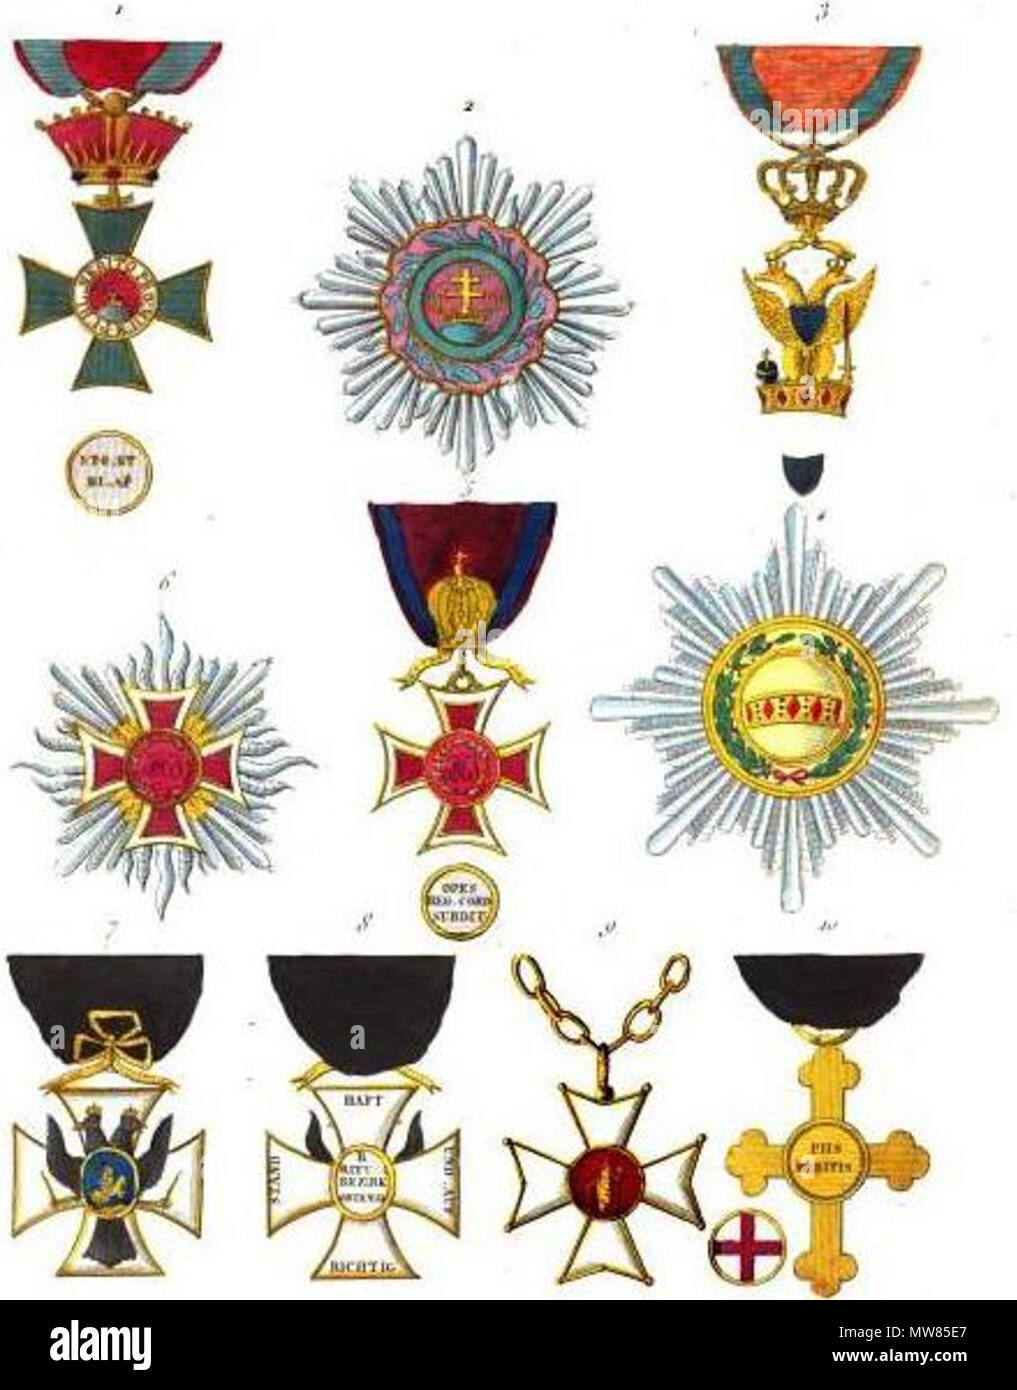 English: Collection Of Historical Orders Of Chivalry Civil And Military...: 1. Order Of Saint Stephen Of Hungary, Badge (Austria) 2.